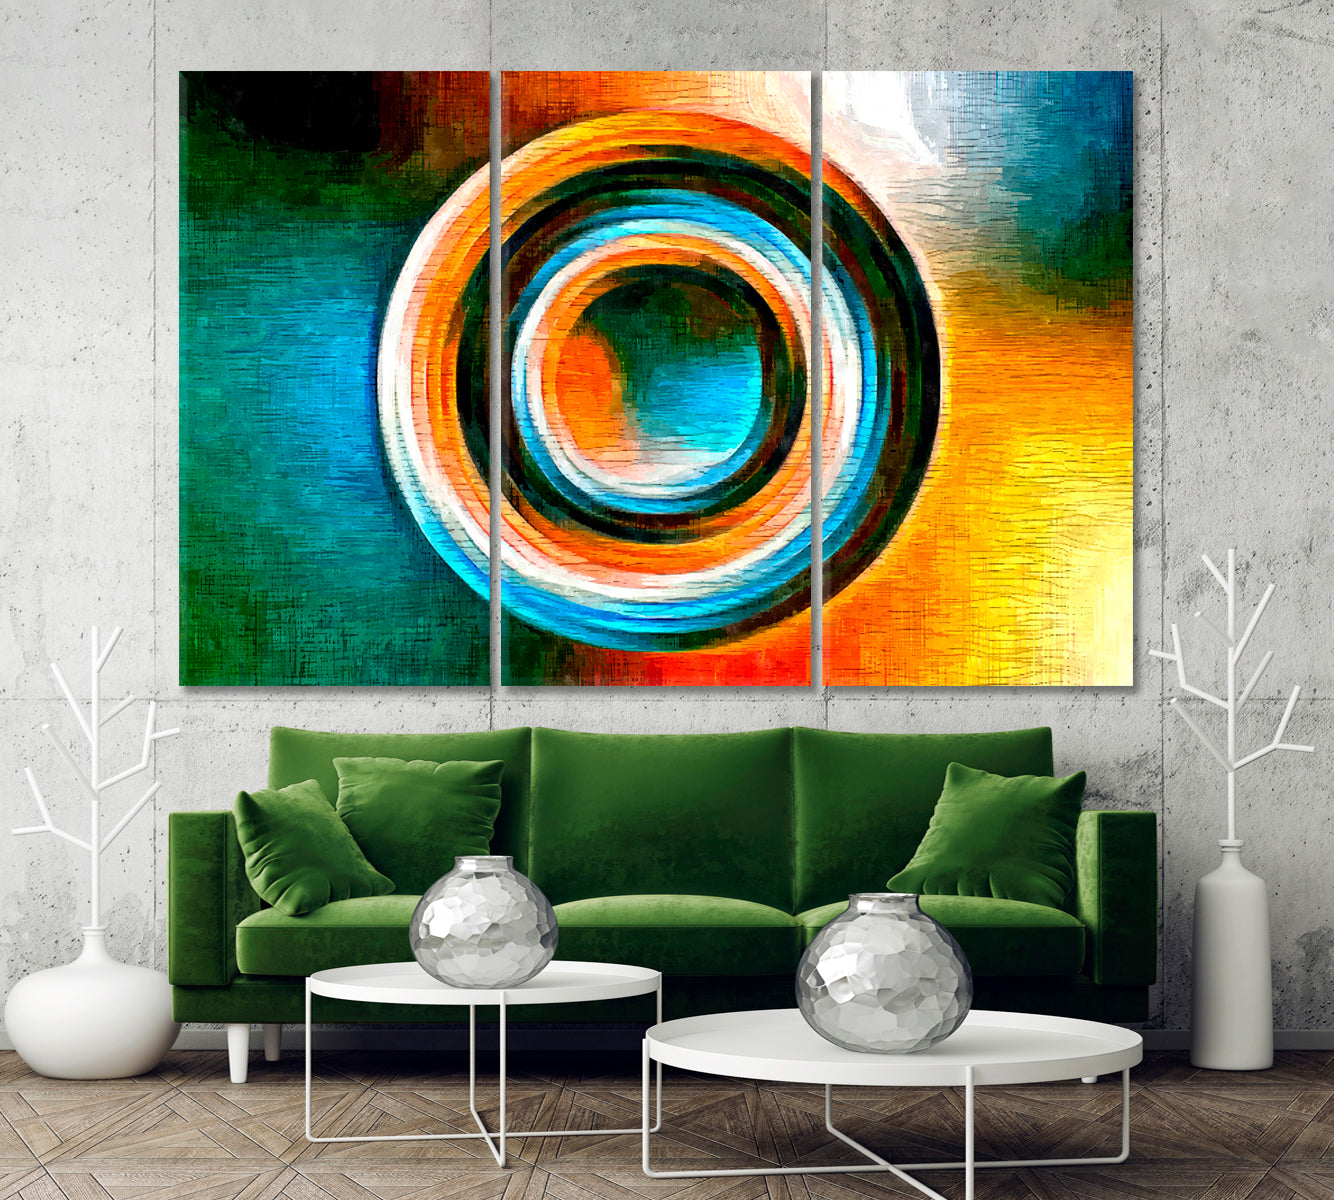 Colored Circle Focal Point Turquoise Orange Geometric Shape Modernism Abstract Art Print Artesty 3 panels 36" x 24" 